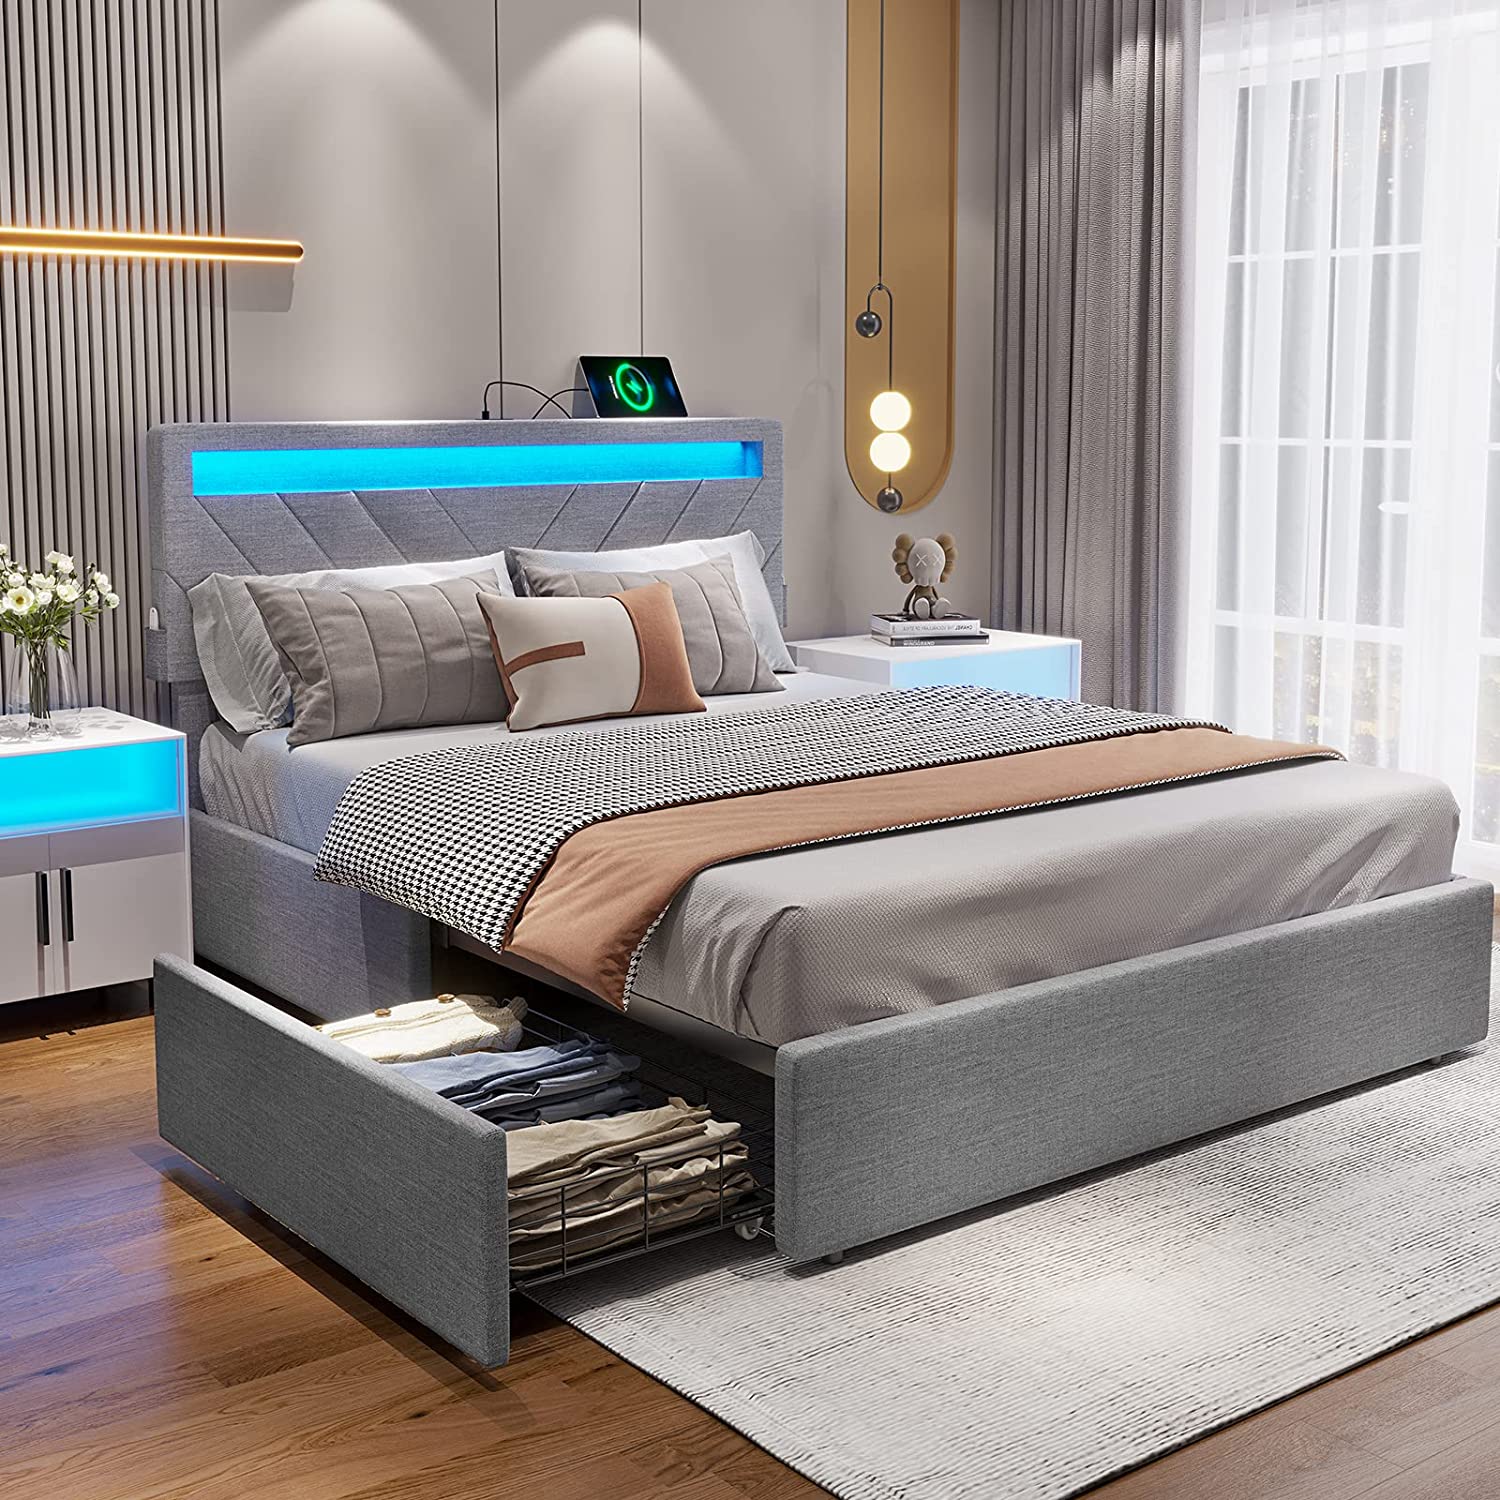 ADORNEVE Queen Size LED Bed Frame with Drawers, Upholstered Platform Bed with 2 USB Charging Station, No Box Spring Needed, Light Grey - image 1 of 8